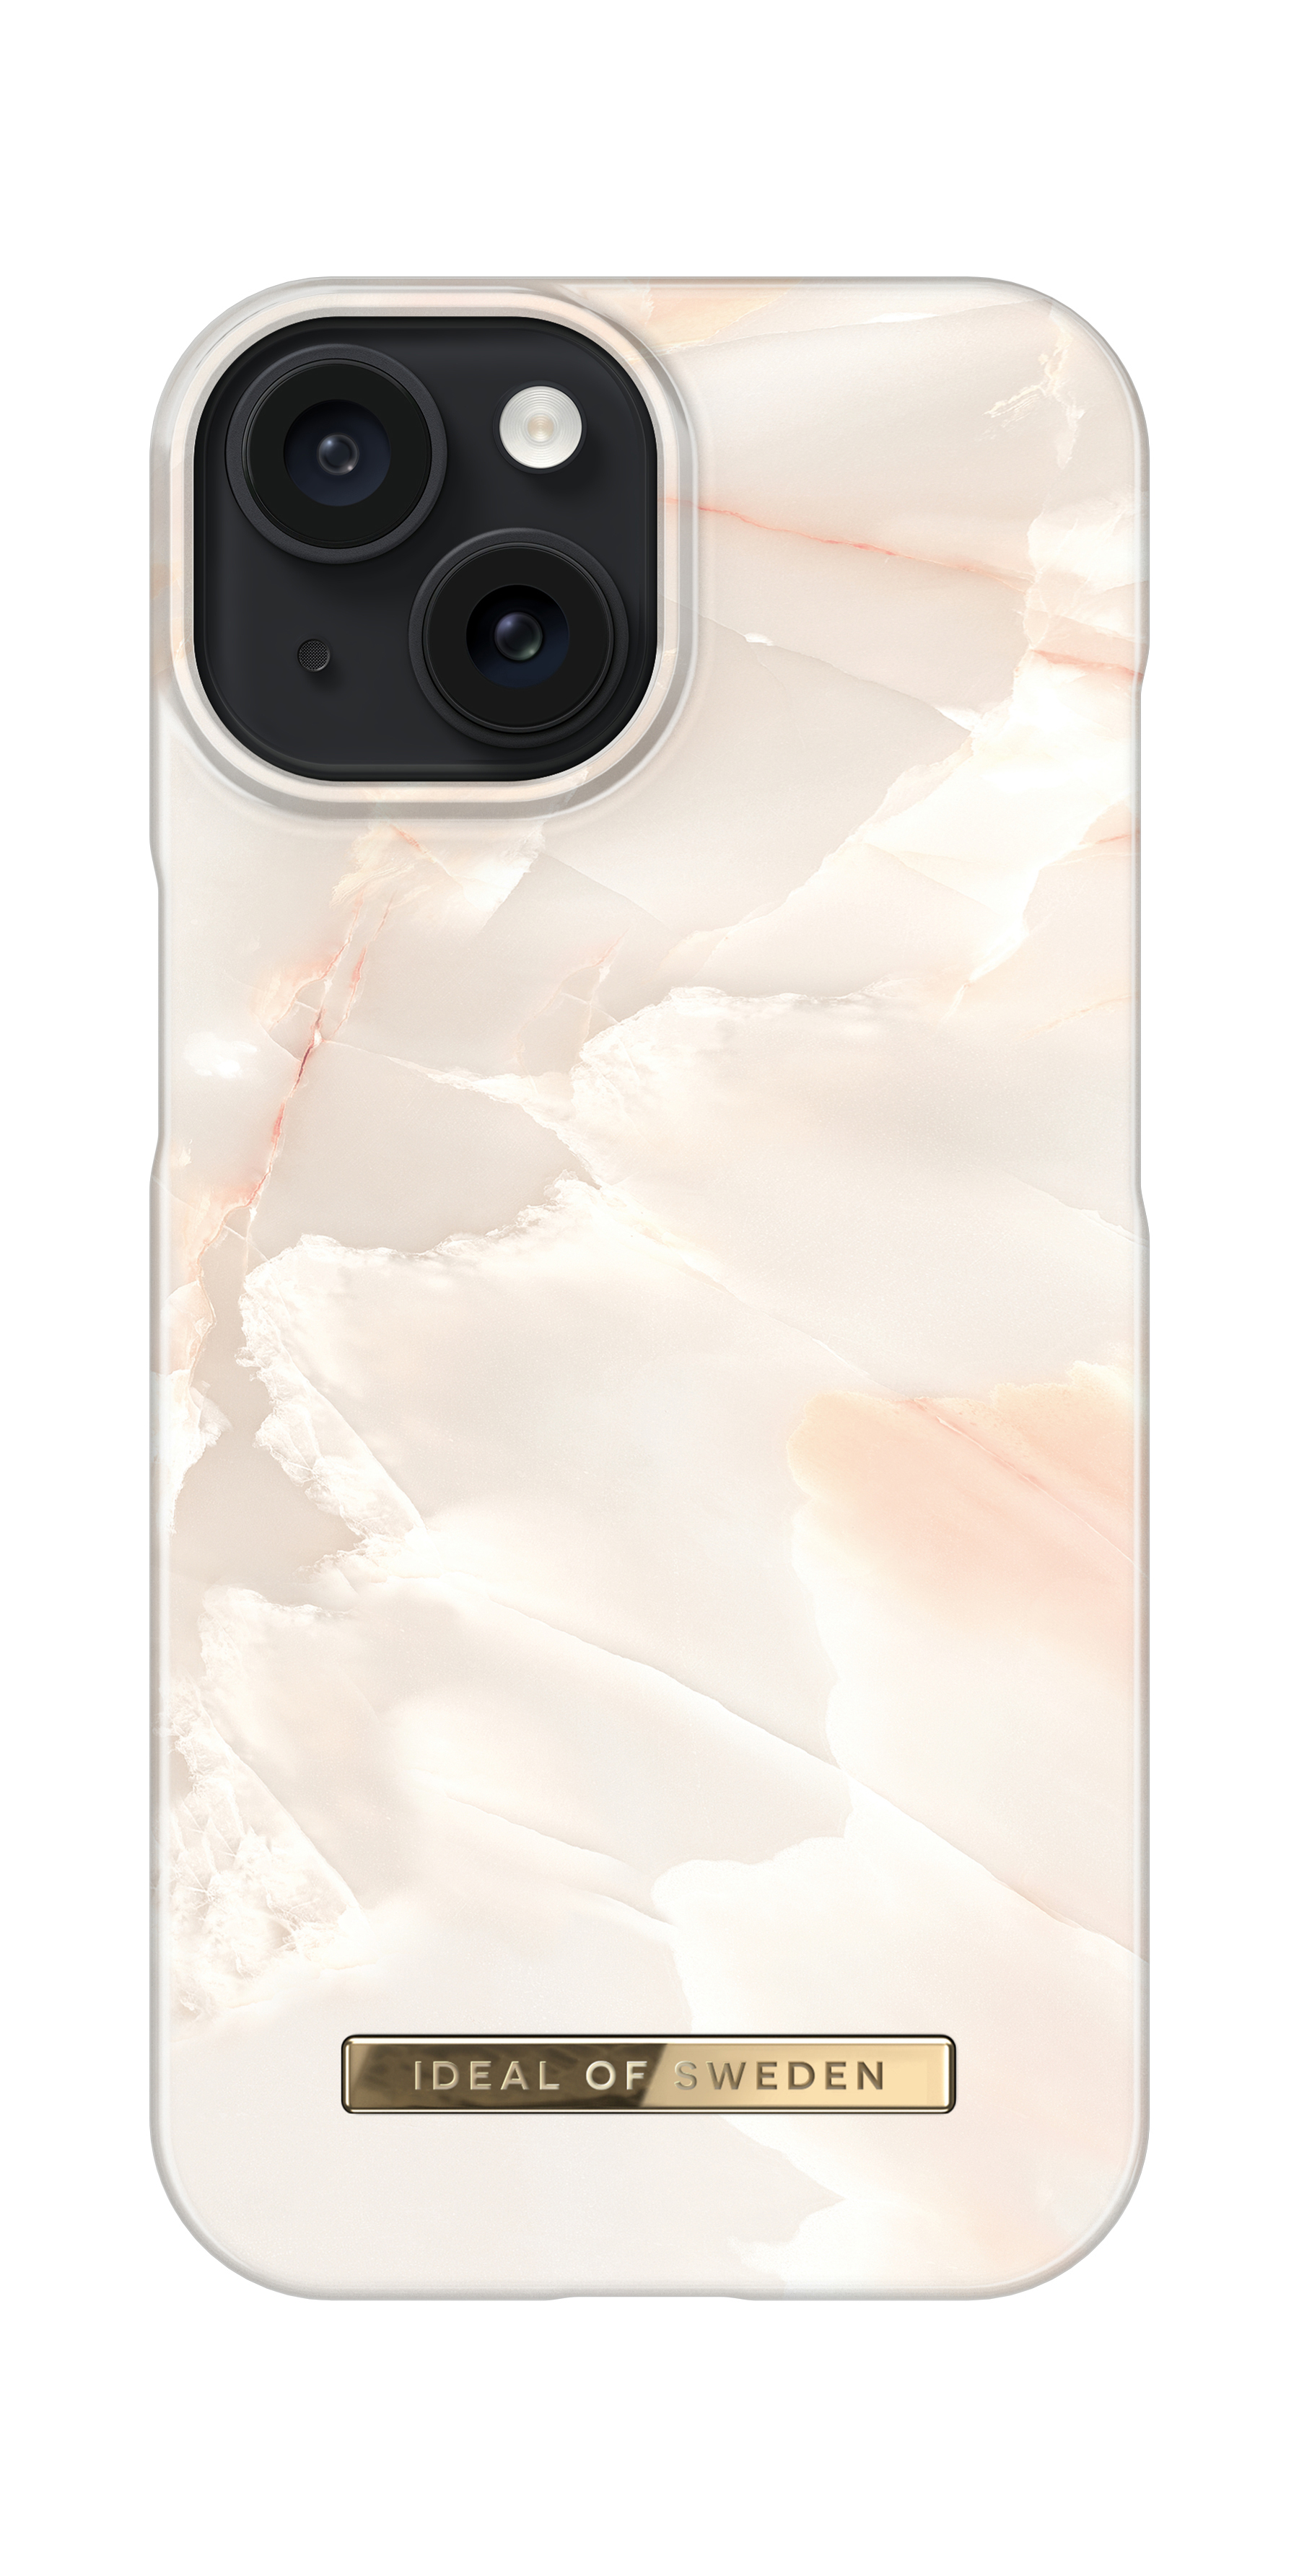 IDEAL OF Apple, Max, Backcover, Pearl iPhone Case, Rose Fashion 15 Pro SWEDEN Marble